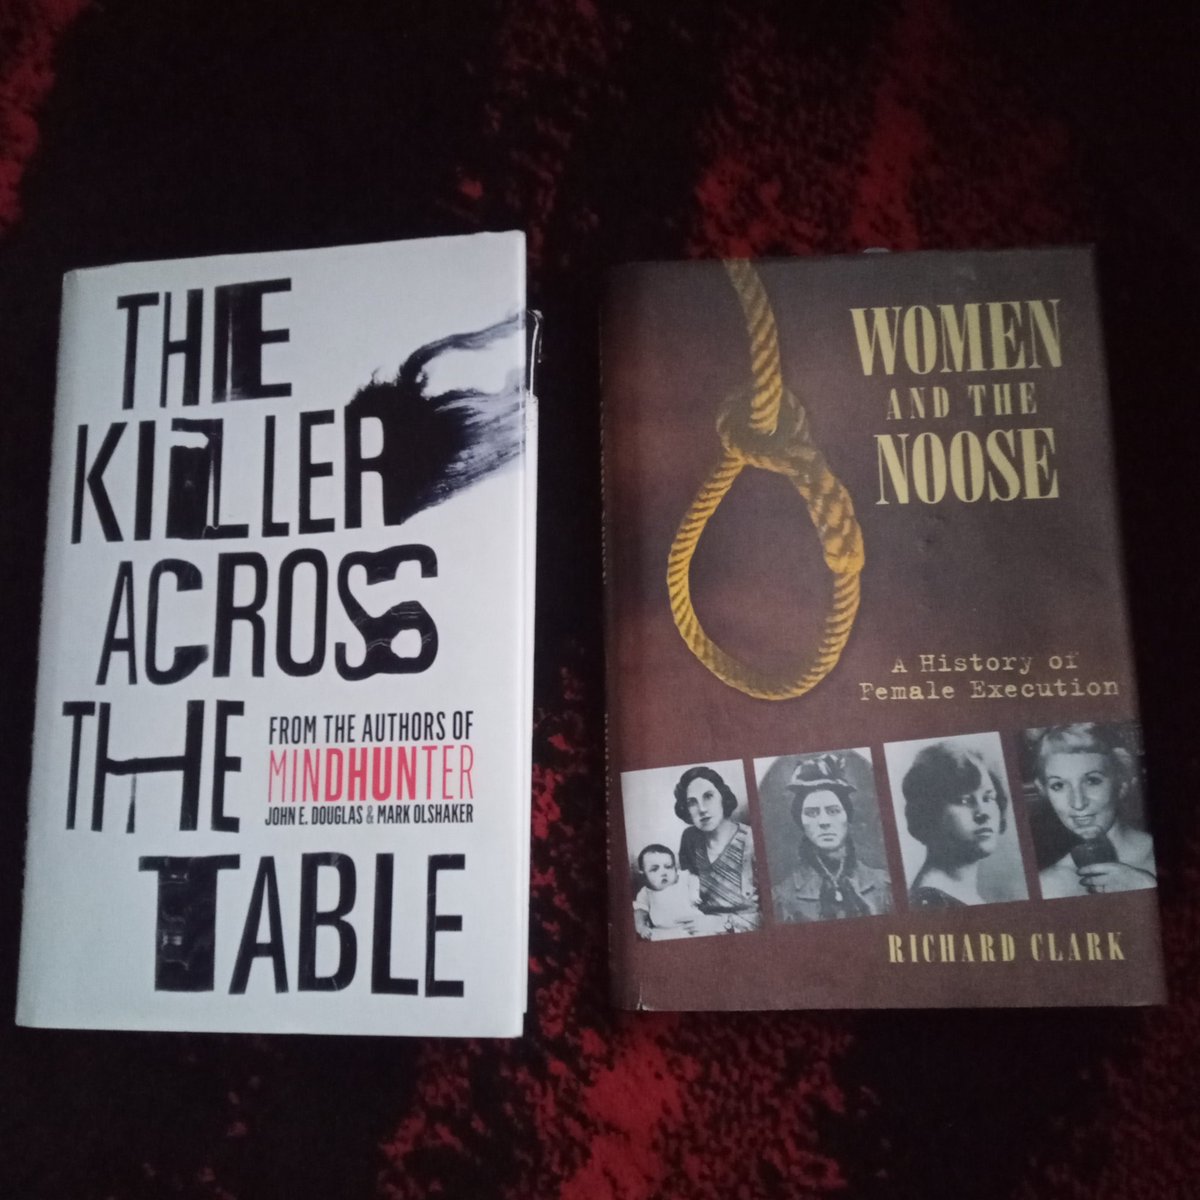 #Fridayreads The Killer Across the table by John Douglas & Mark Olshaker, and Women and the Noose by Richard Clark. These were also the books we read on the plane to and from Italy 😂

#reading #books #nonfiction #truecrime #historicalcrime #history